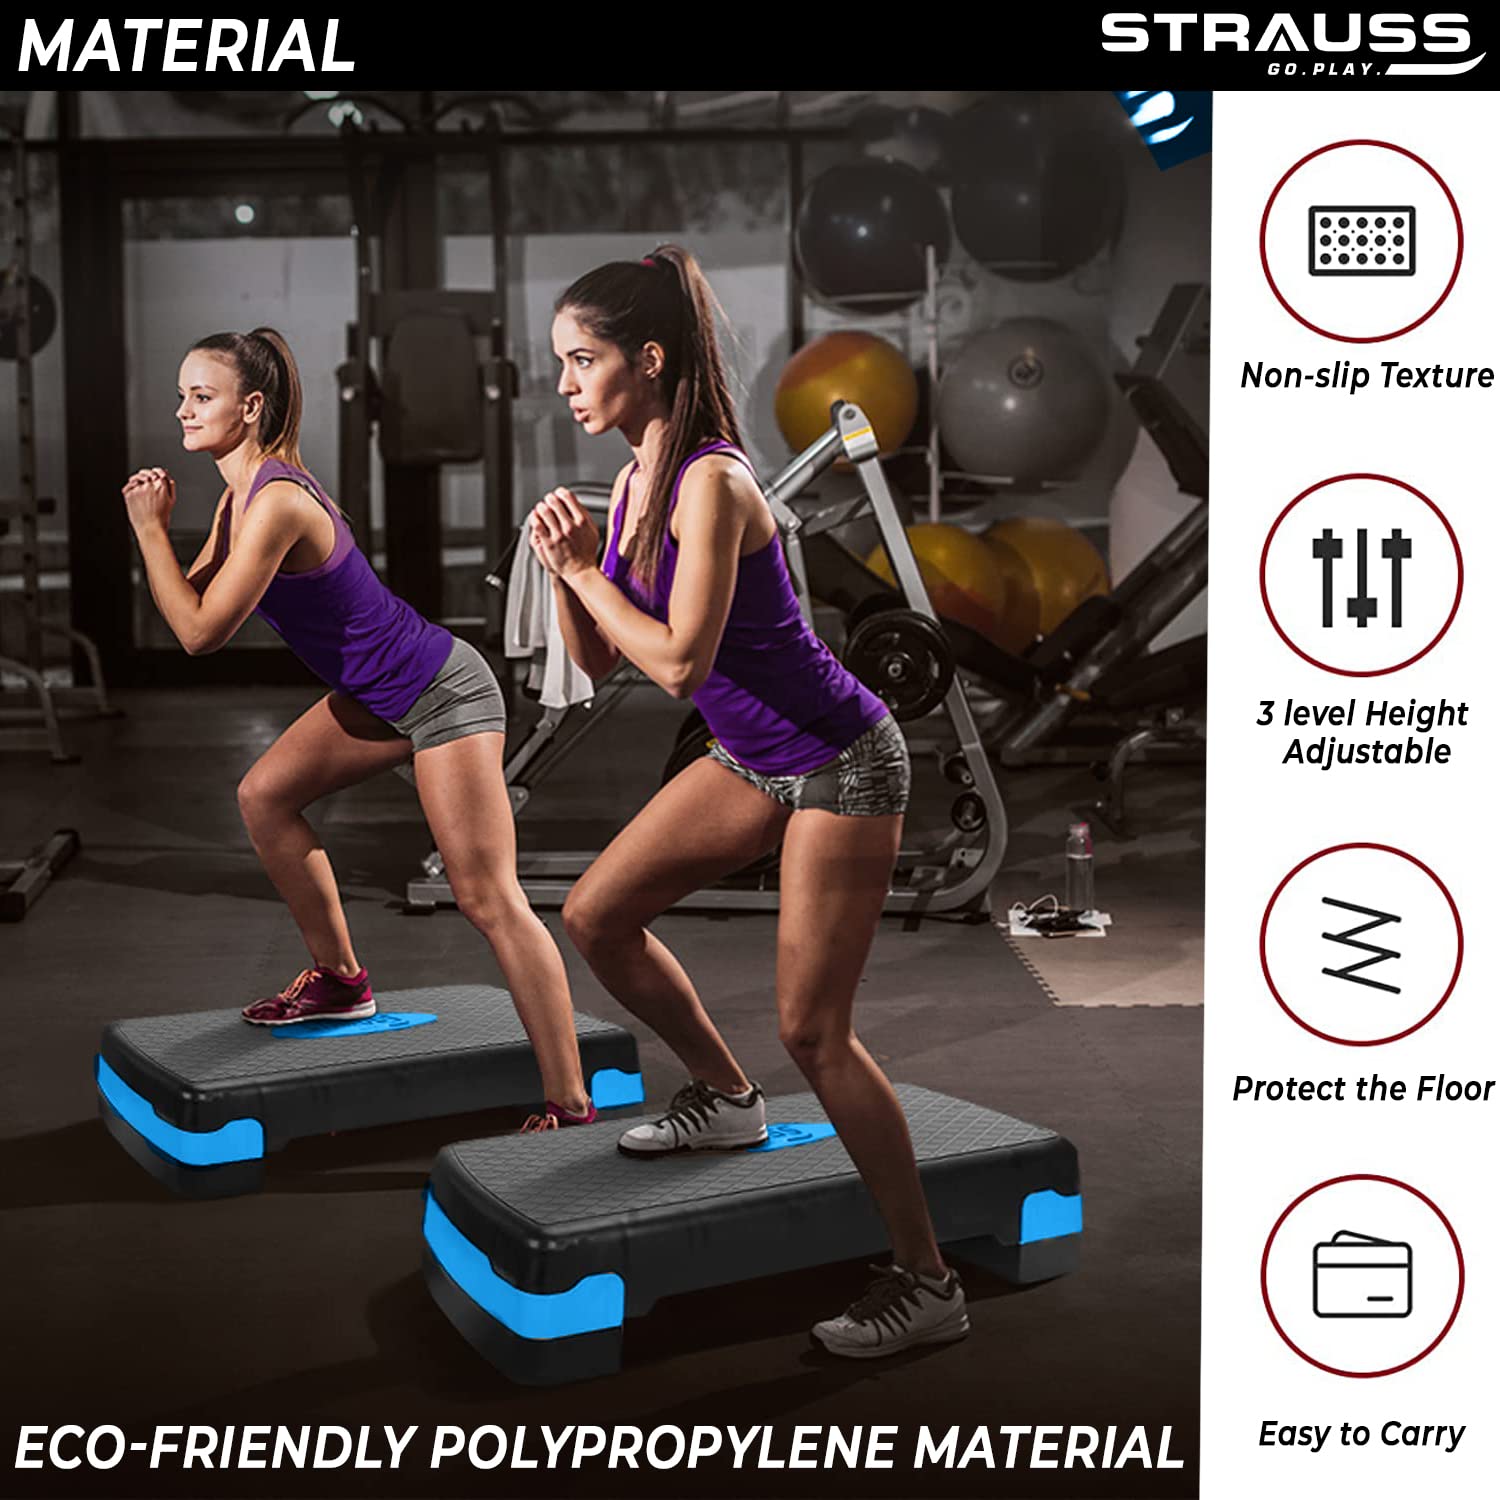 Strauss Aerobic Stepper | Two Height Level Adjustments - 4 inches and 6 inches | Slip-Resistant & Shock Absorbing Platform for Extra-Durability - Supports Upto 200 KG, (Blue)